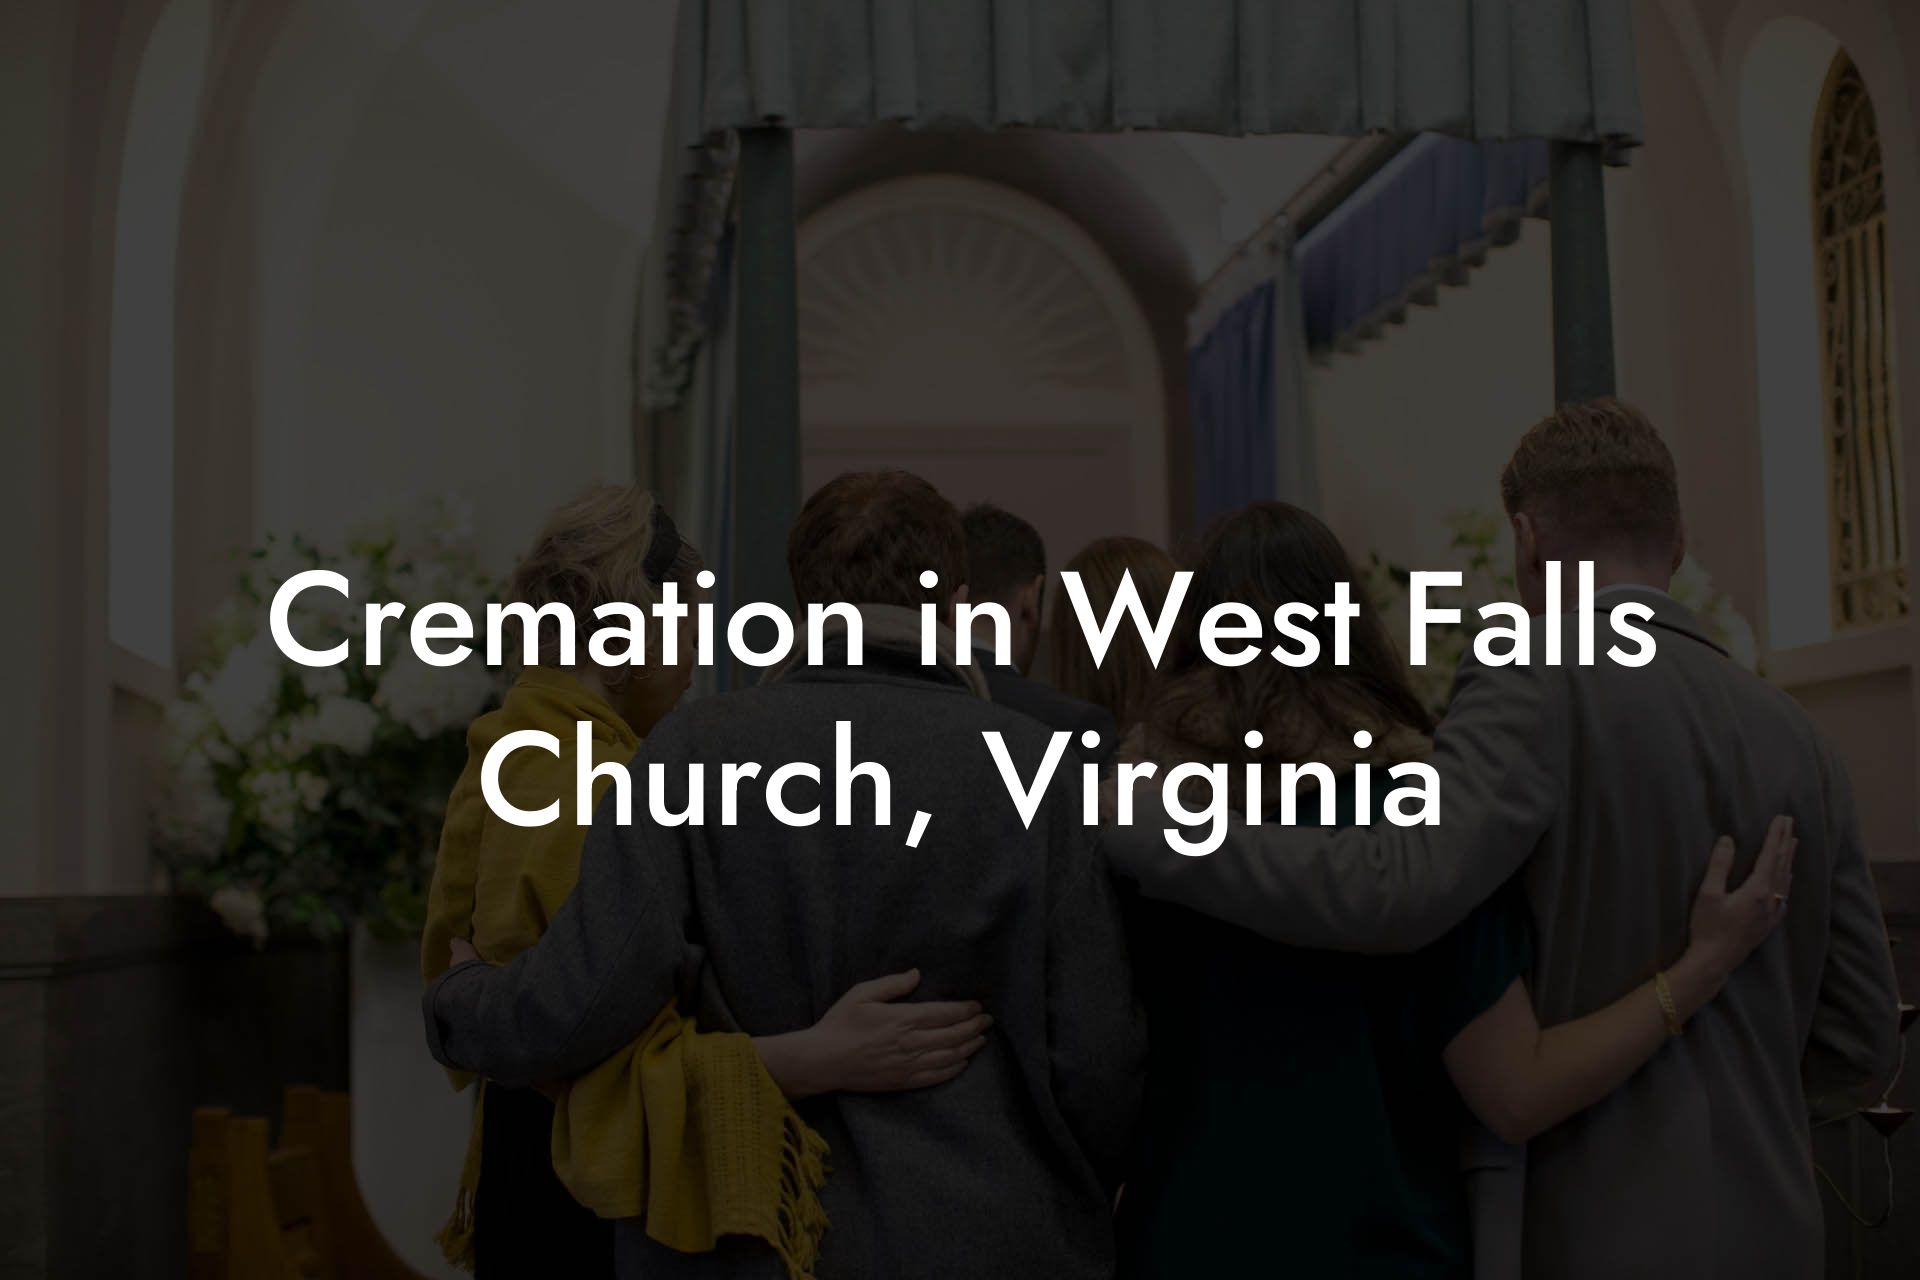 Cremation in West Falls Church, Virginia